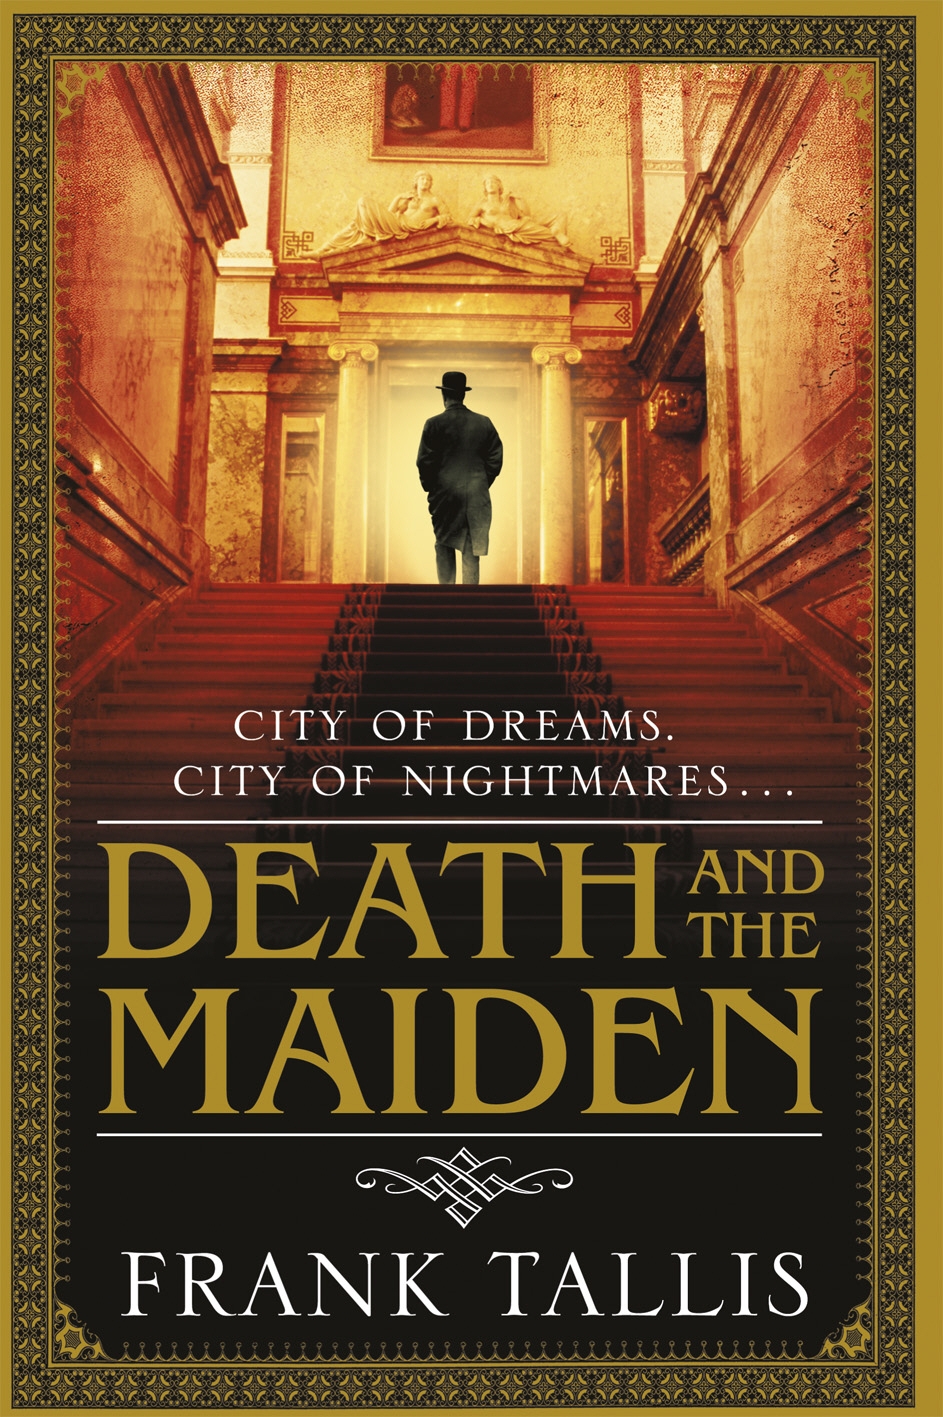 death and the maiden book review